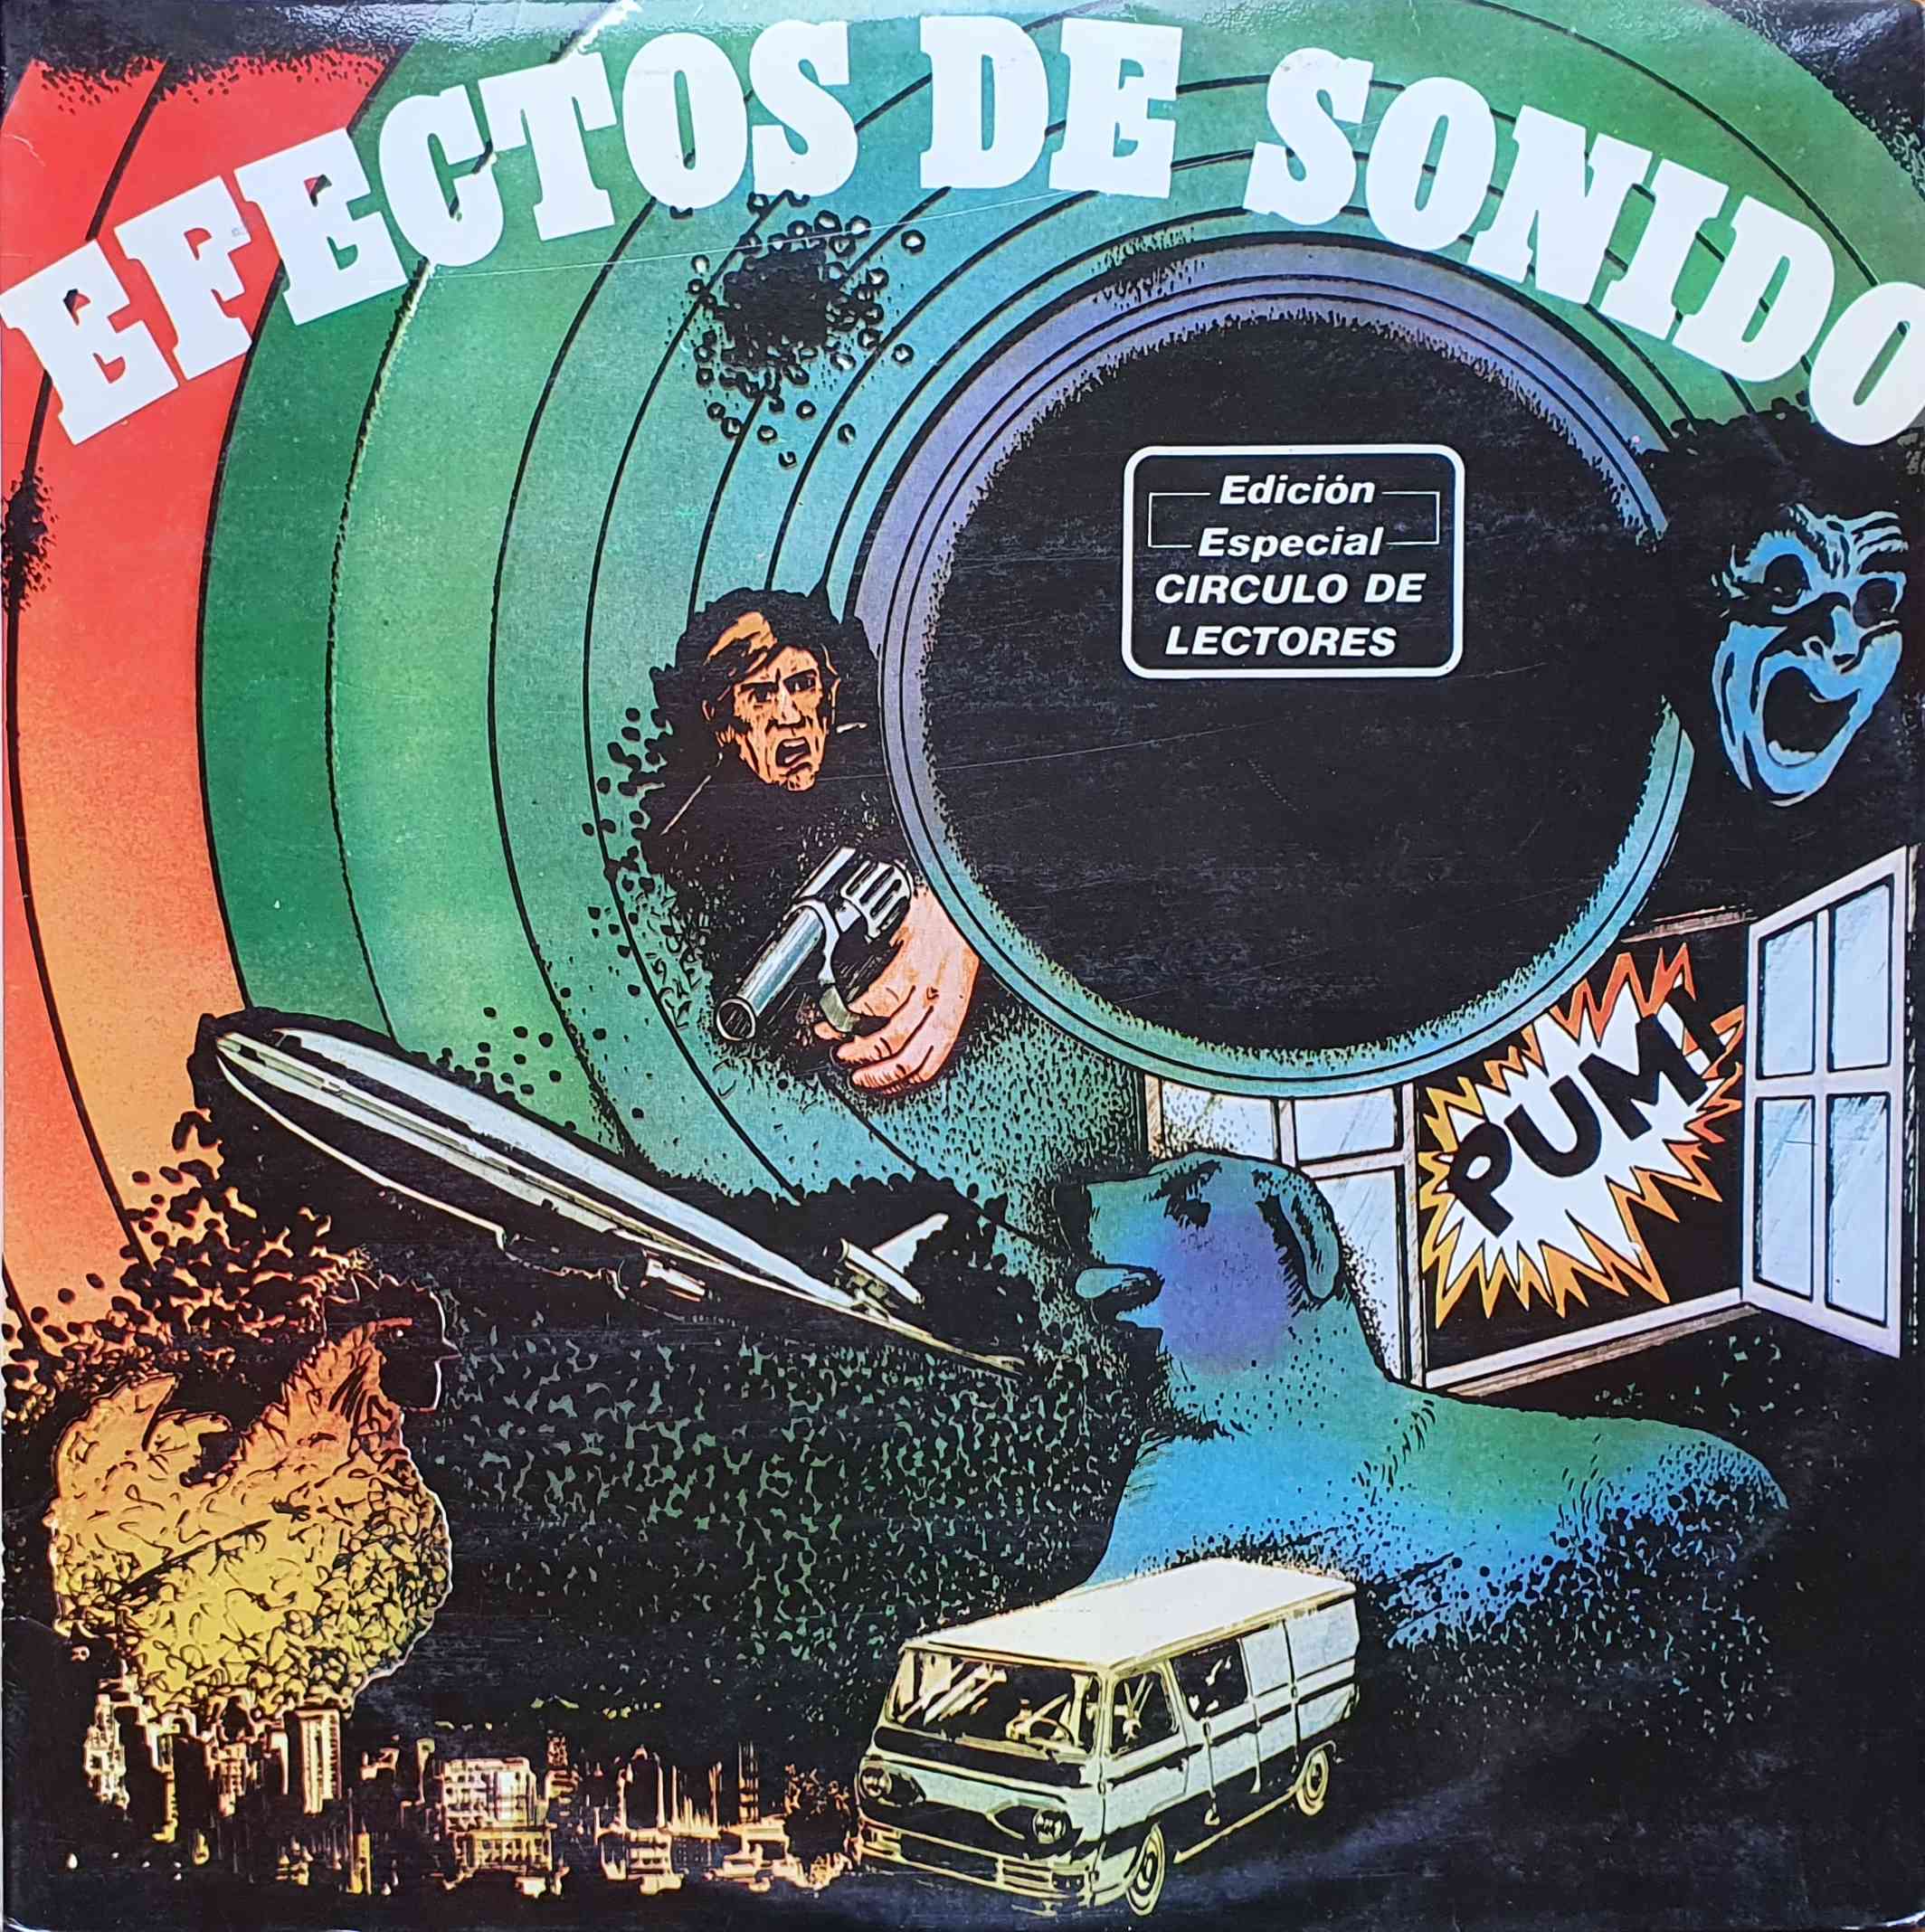 Picture of 53.751 Efectos de Sonido (Spanish import) by artist Various from the BBC albums - Records and Tapes library